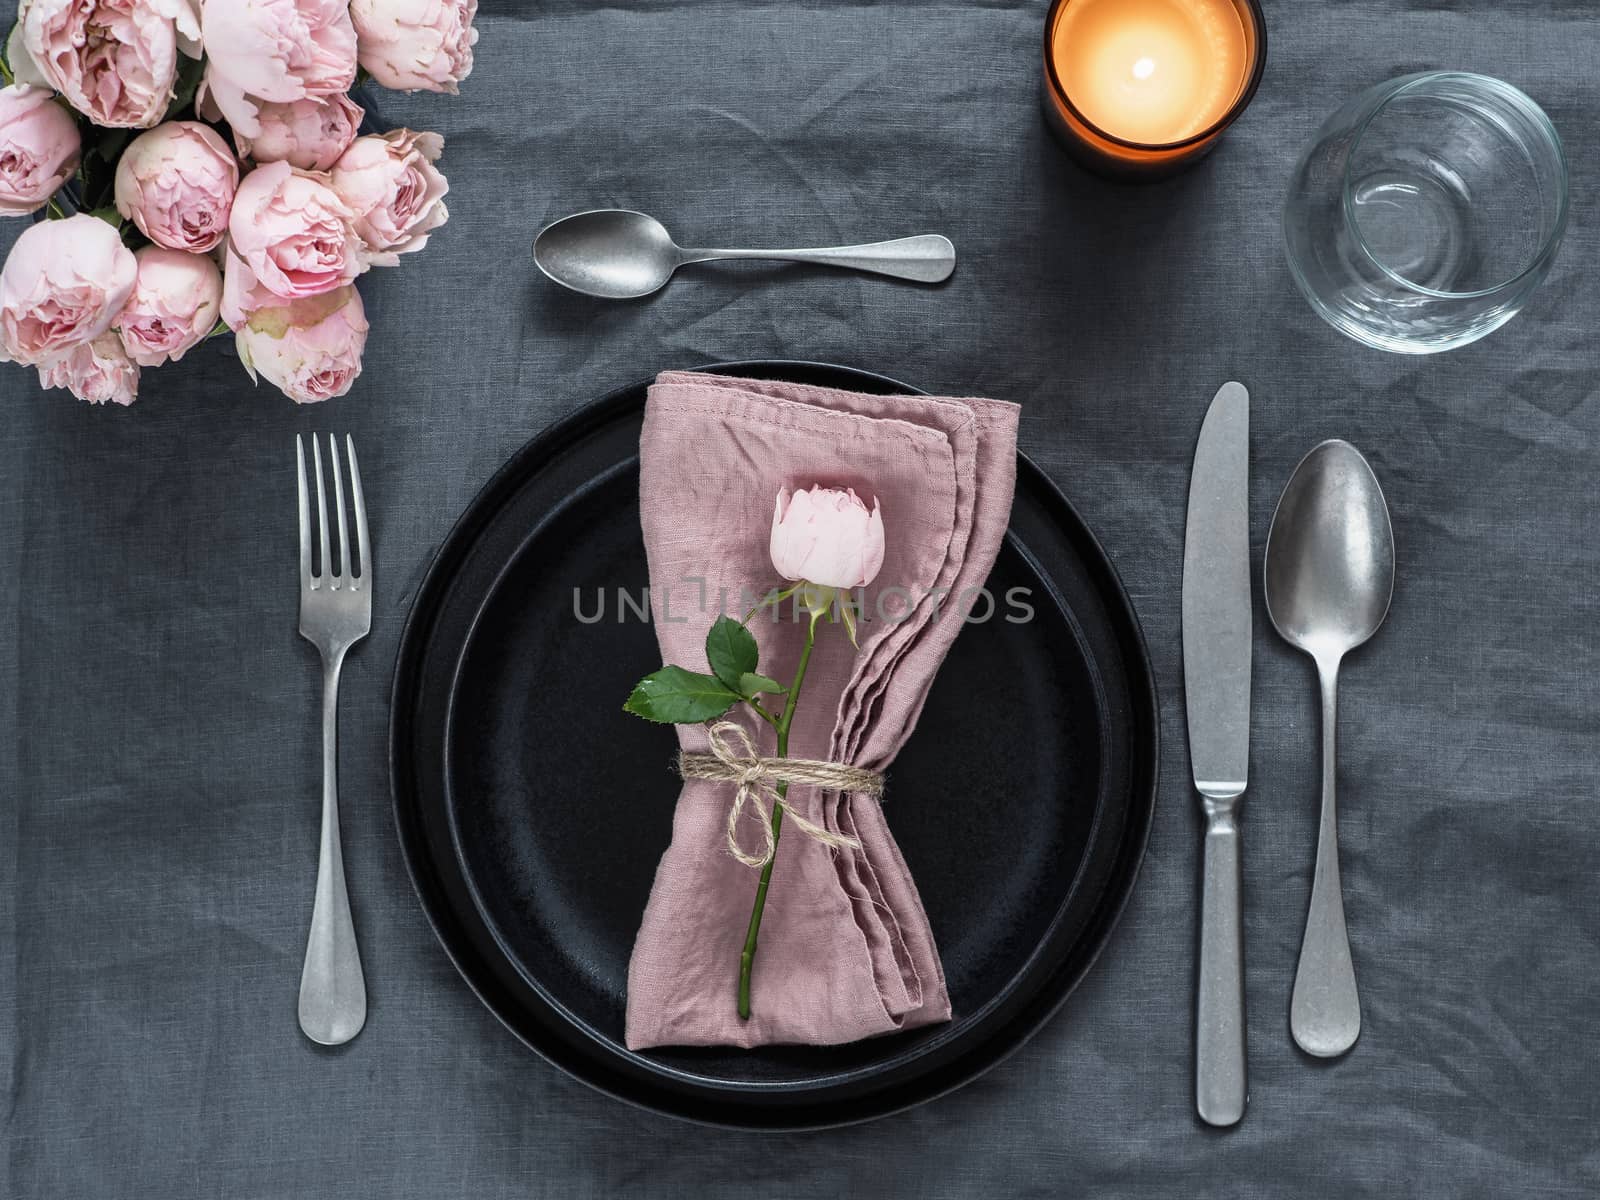 Beautiful table setting on gray linen tablecloth by fascinadora